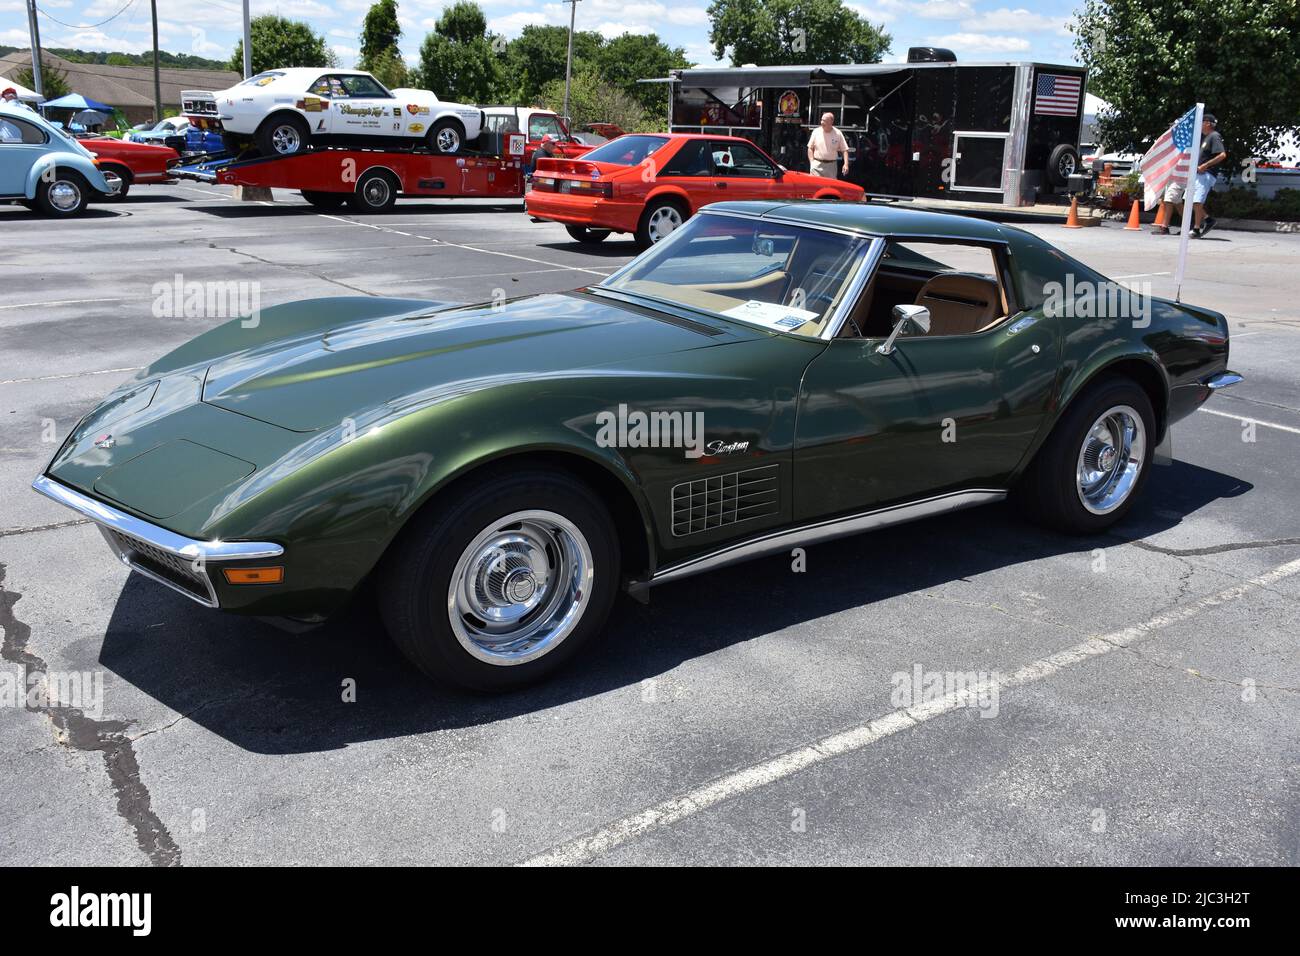 A 1970 Chevrolet Corvette Stingray Coupe on display at a car show. Stock Photo